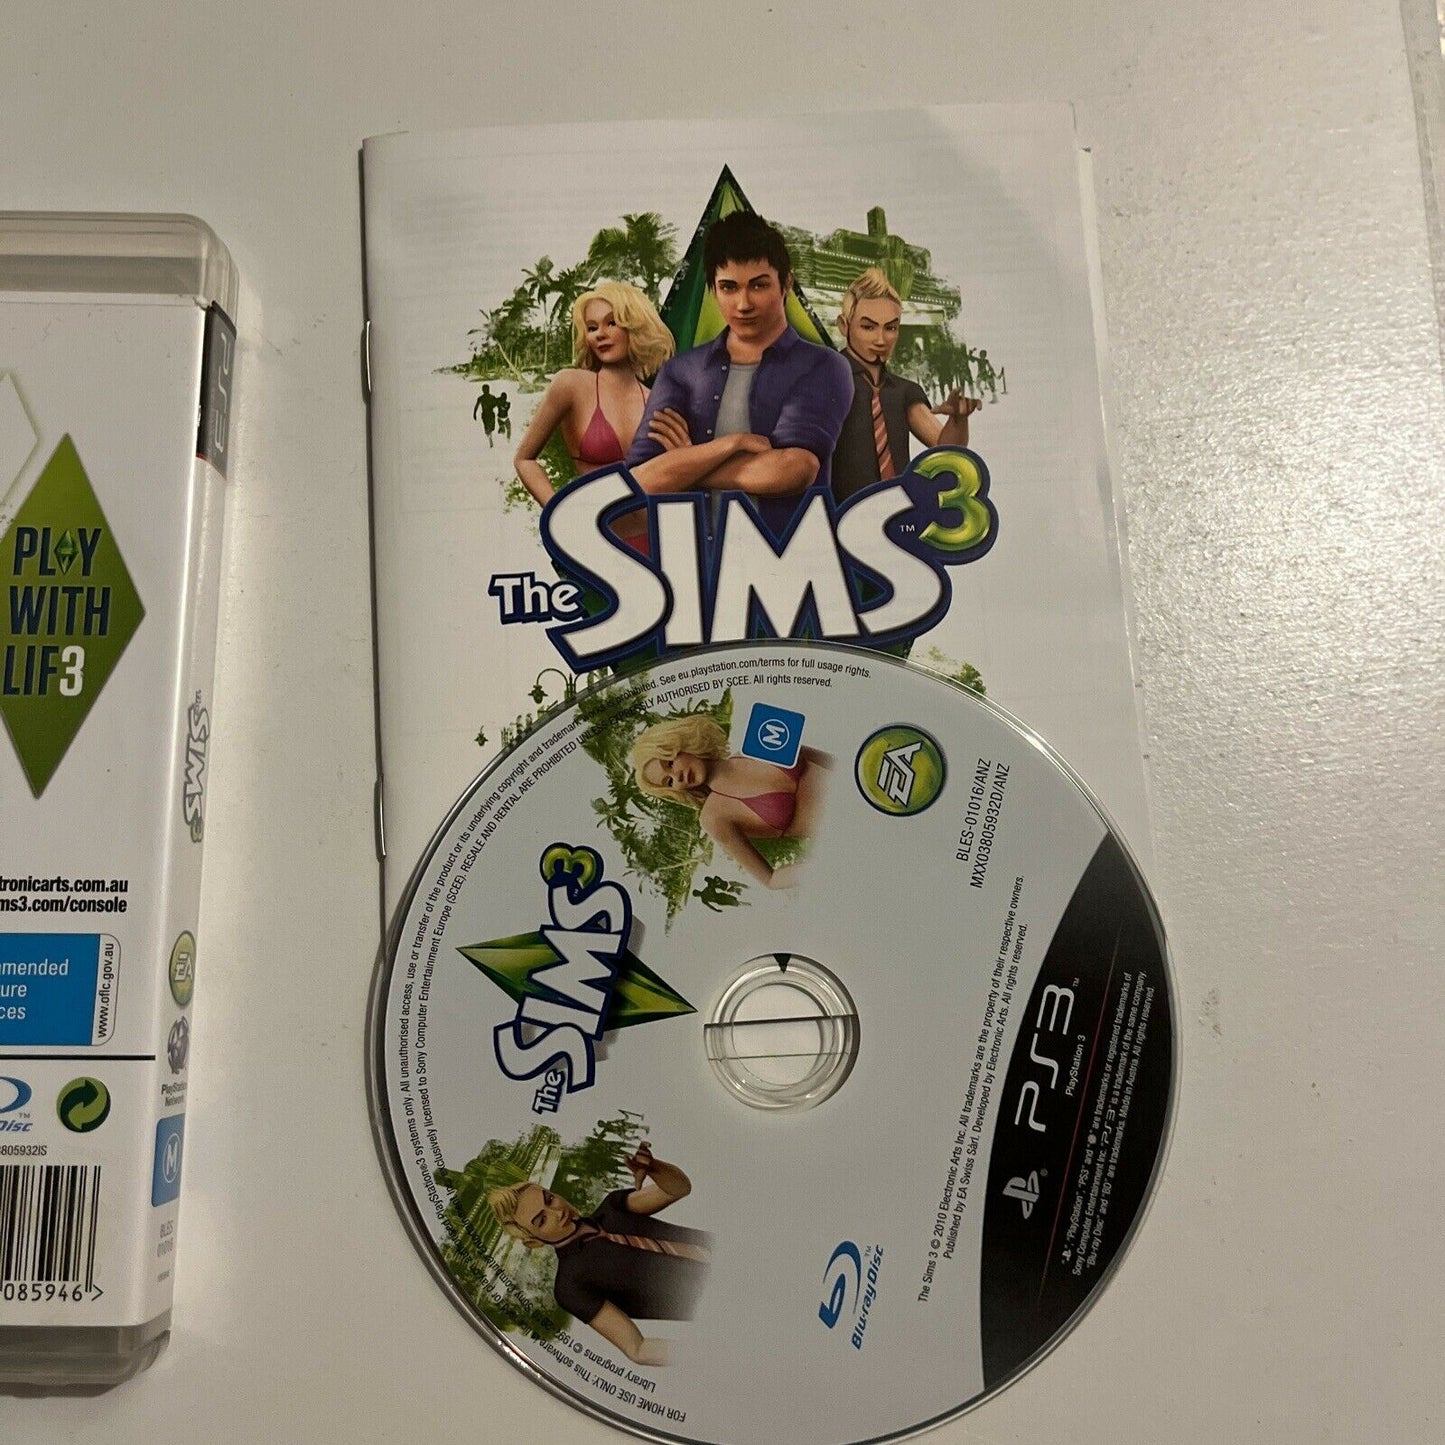 The Sims 3 - Sony PlayStation 3 PS3 Game Complete With Manual